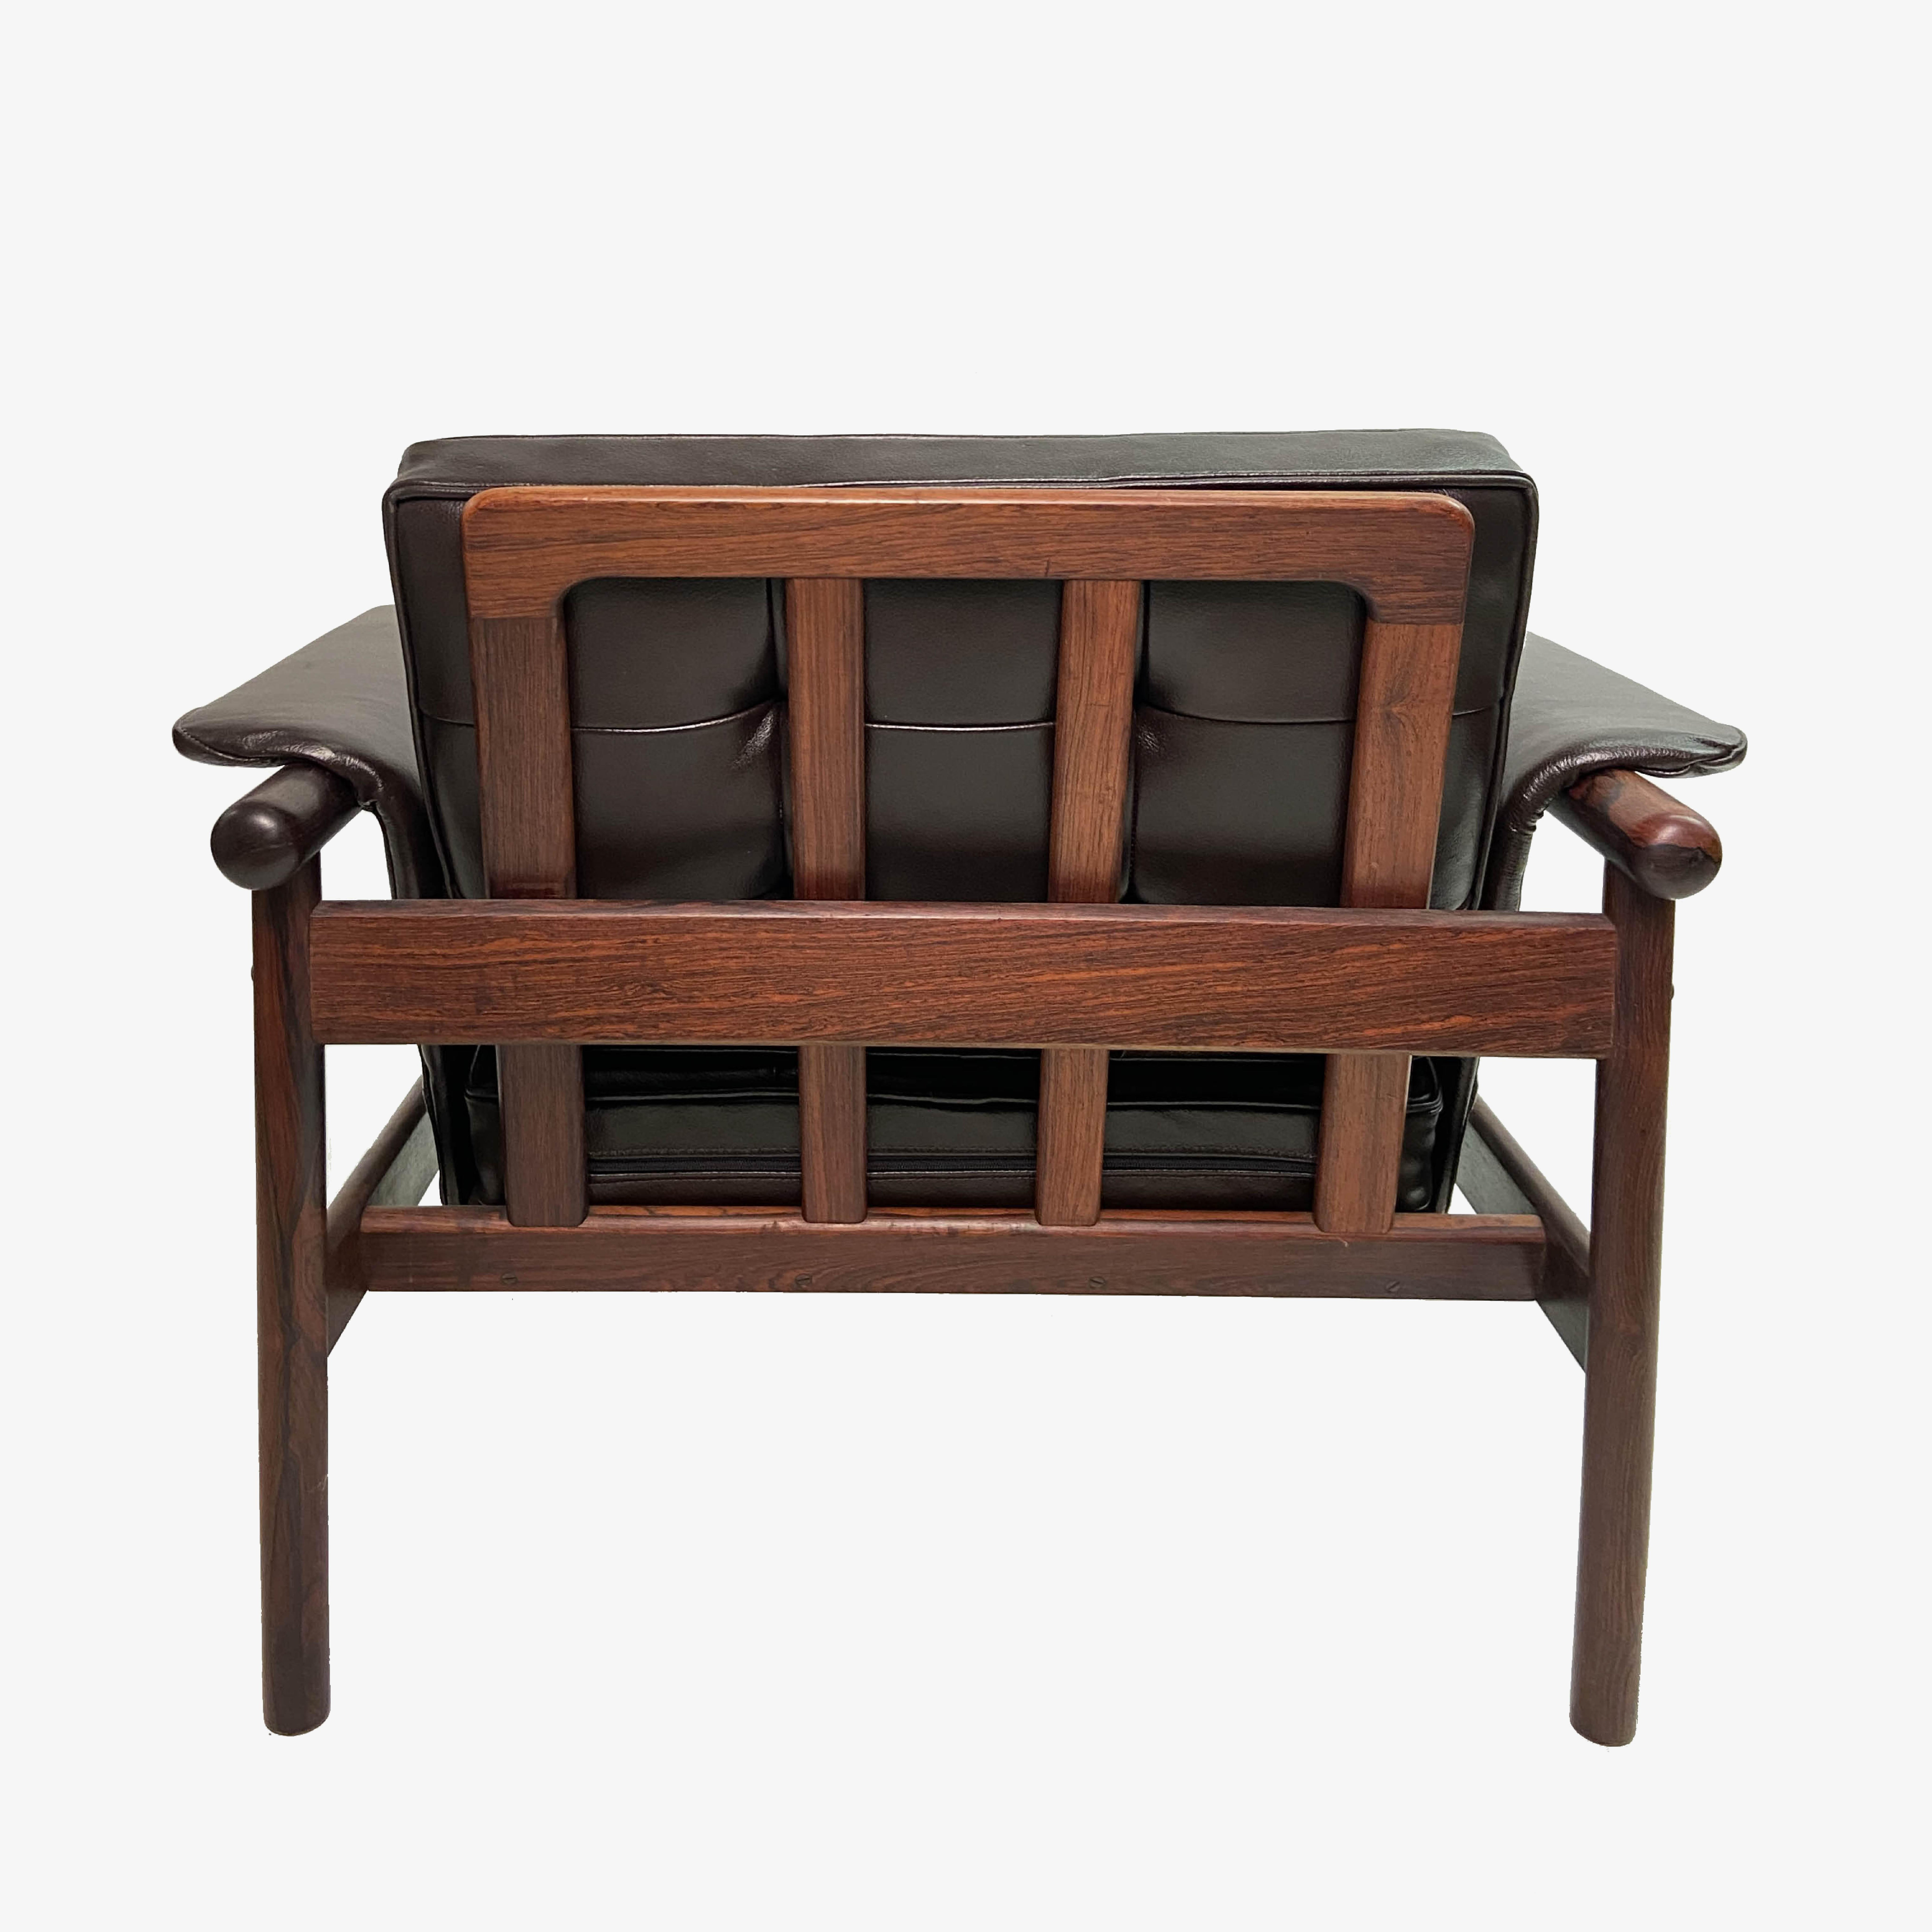 Illum Wikkelsø 'Wiki' Lounge Chairs in Rosewood and Espresso Leather, Pair For Sale 1